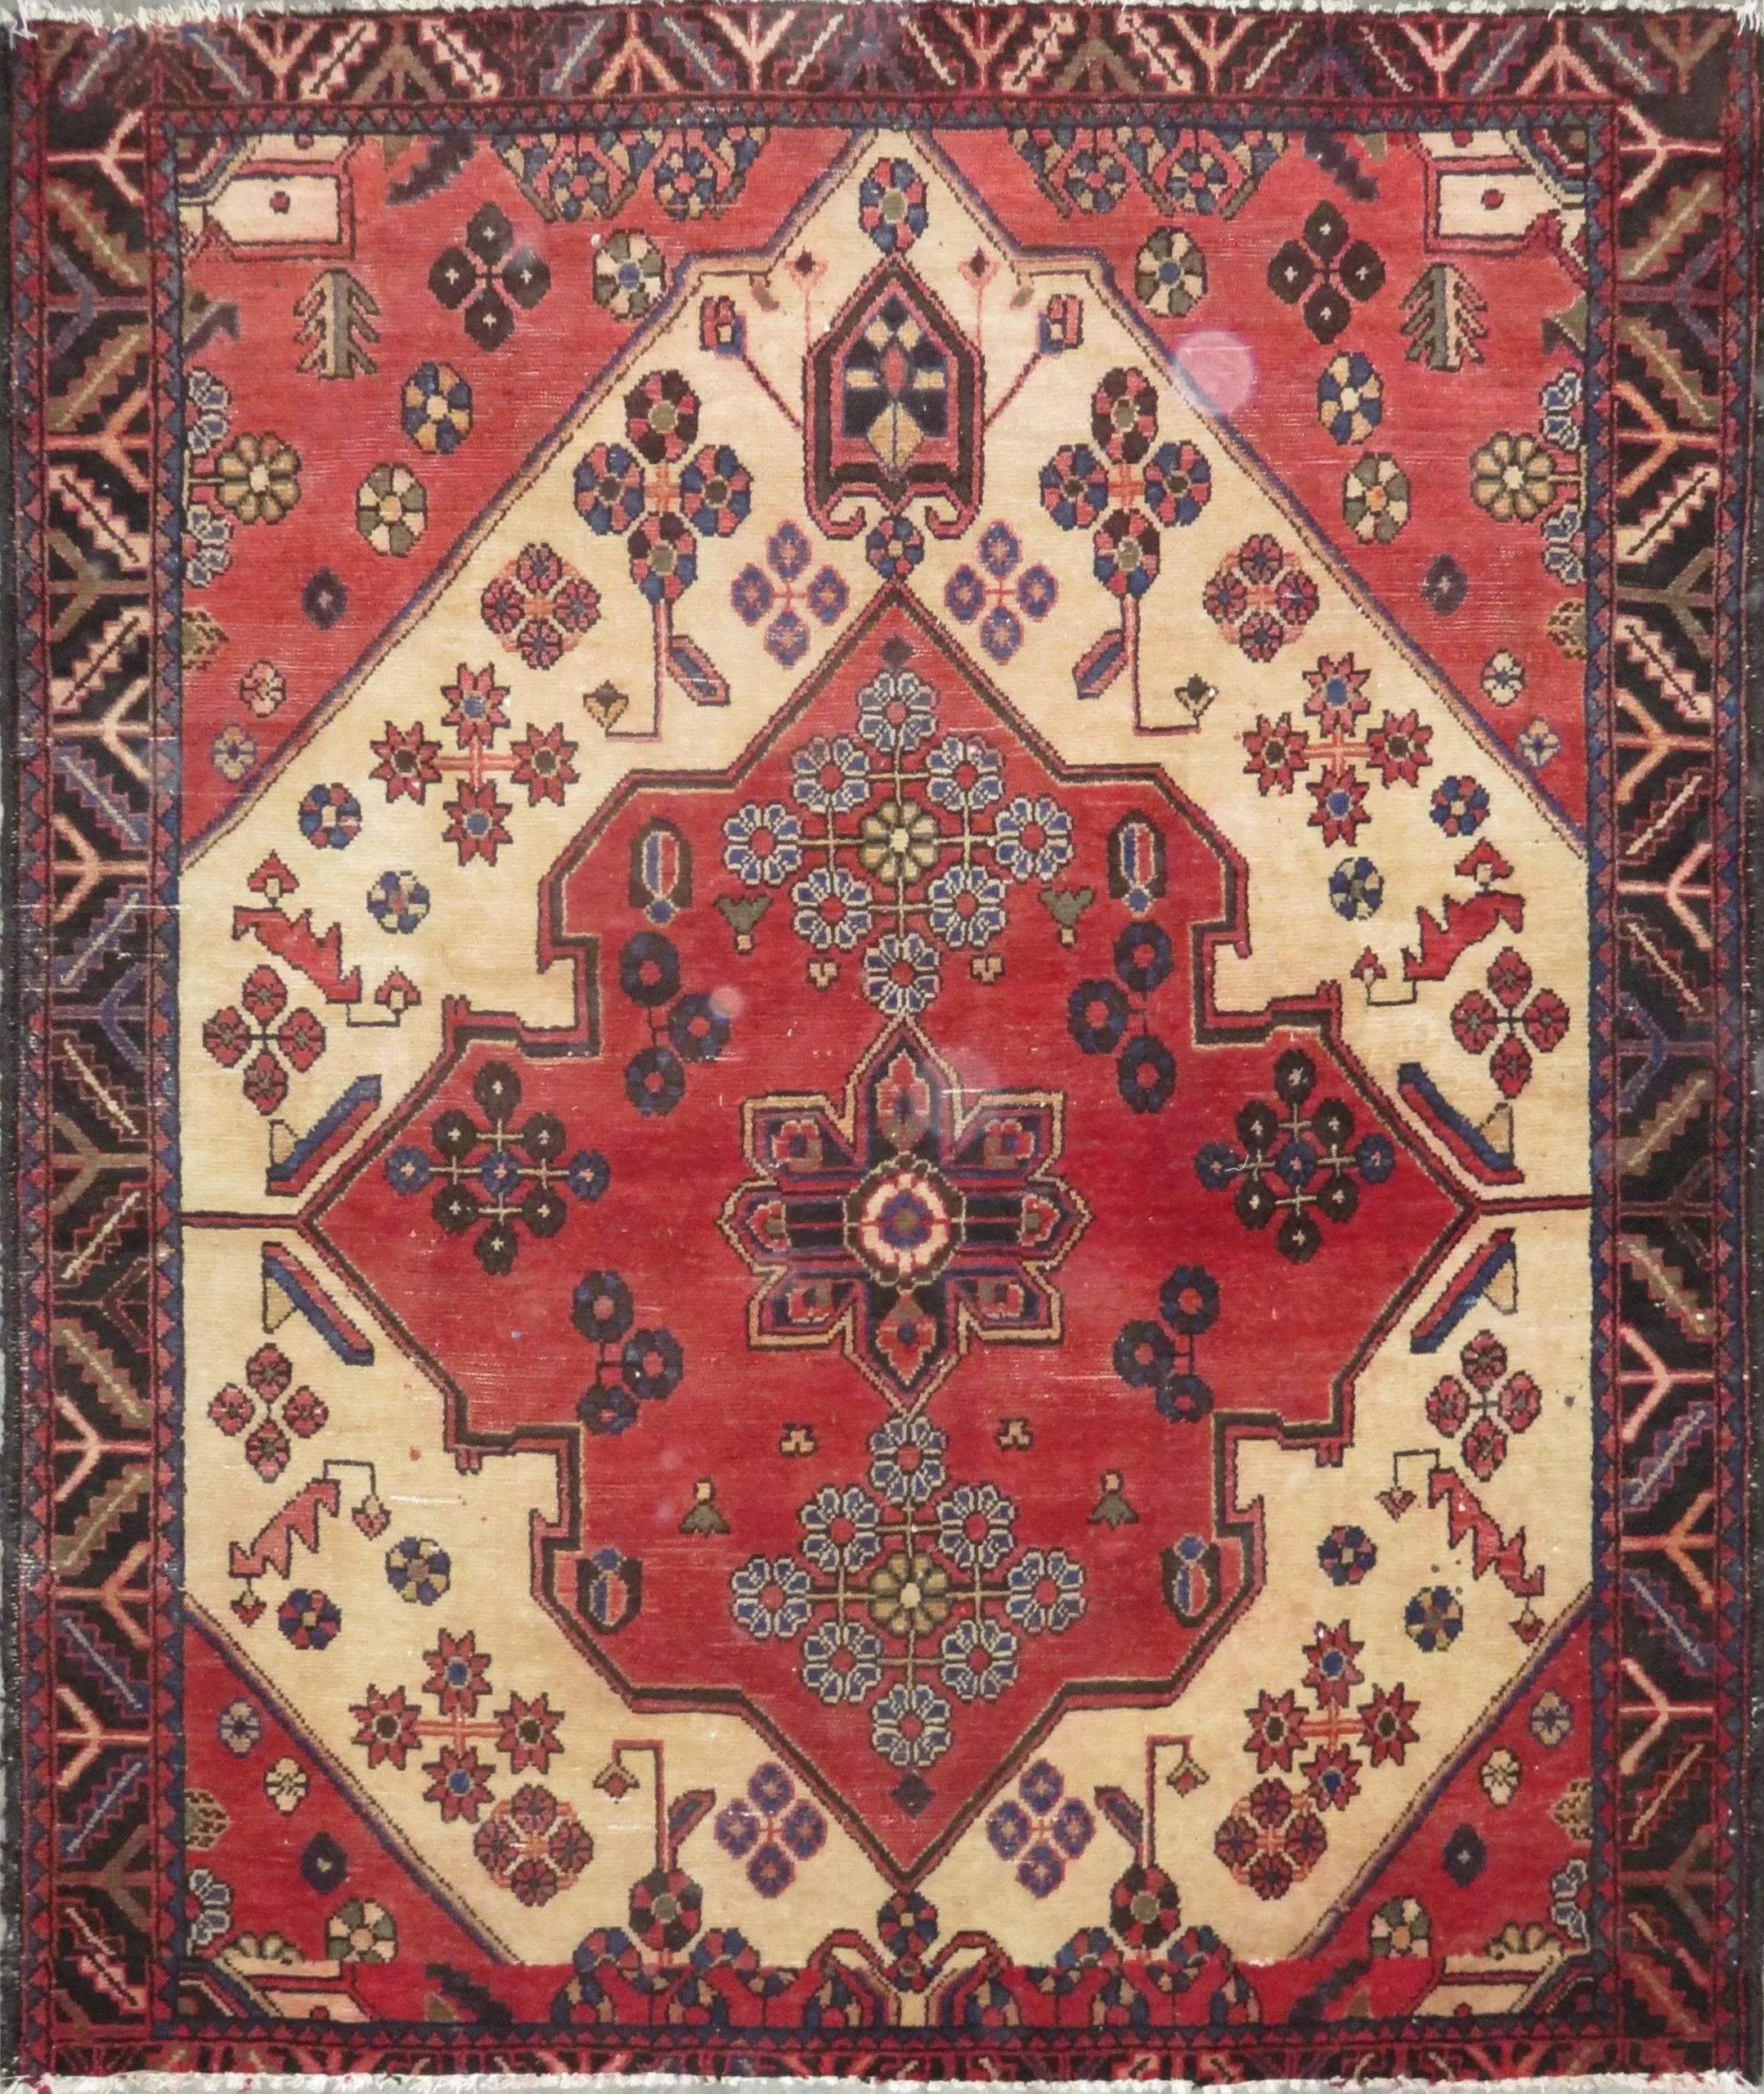 Hand-Knotted Persian Wool Rug _ Luxurious Vintage Design, 5'2" x 4'2", Artisan Crafted